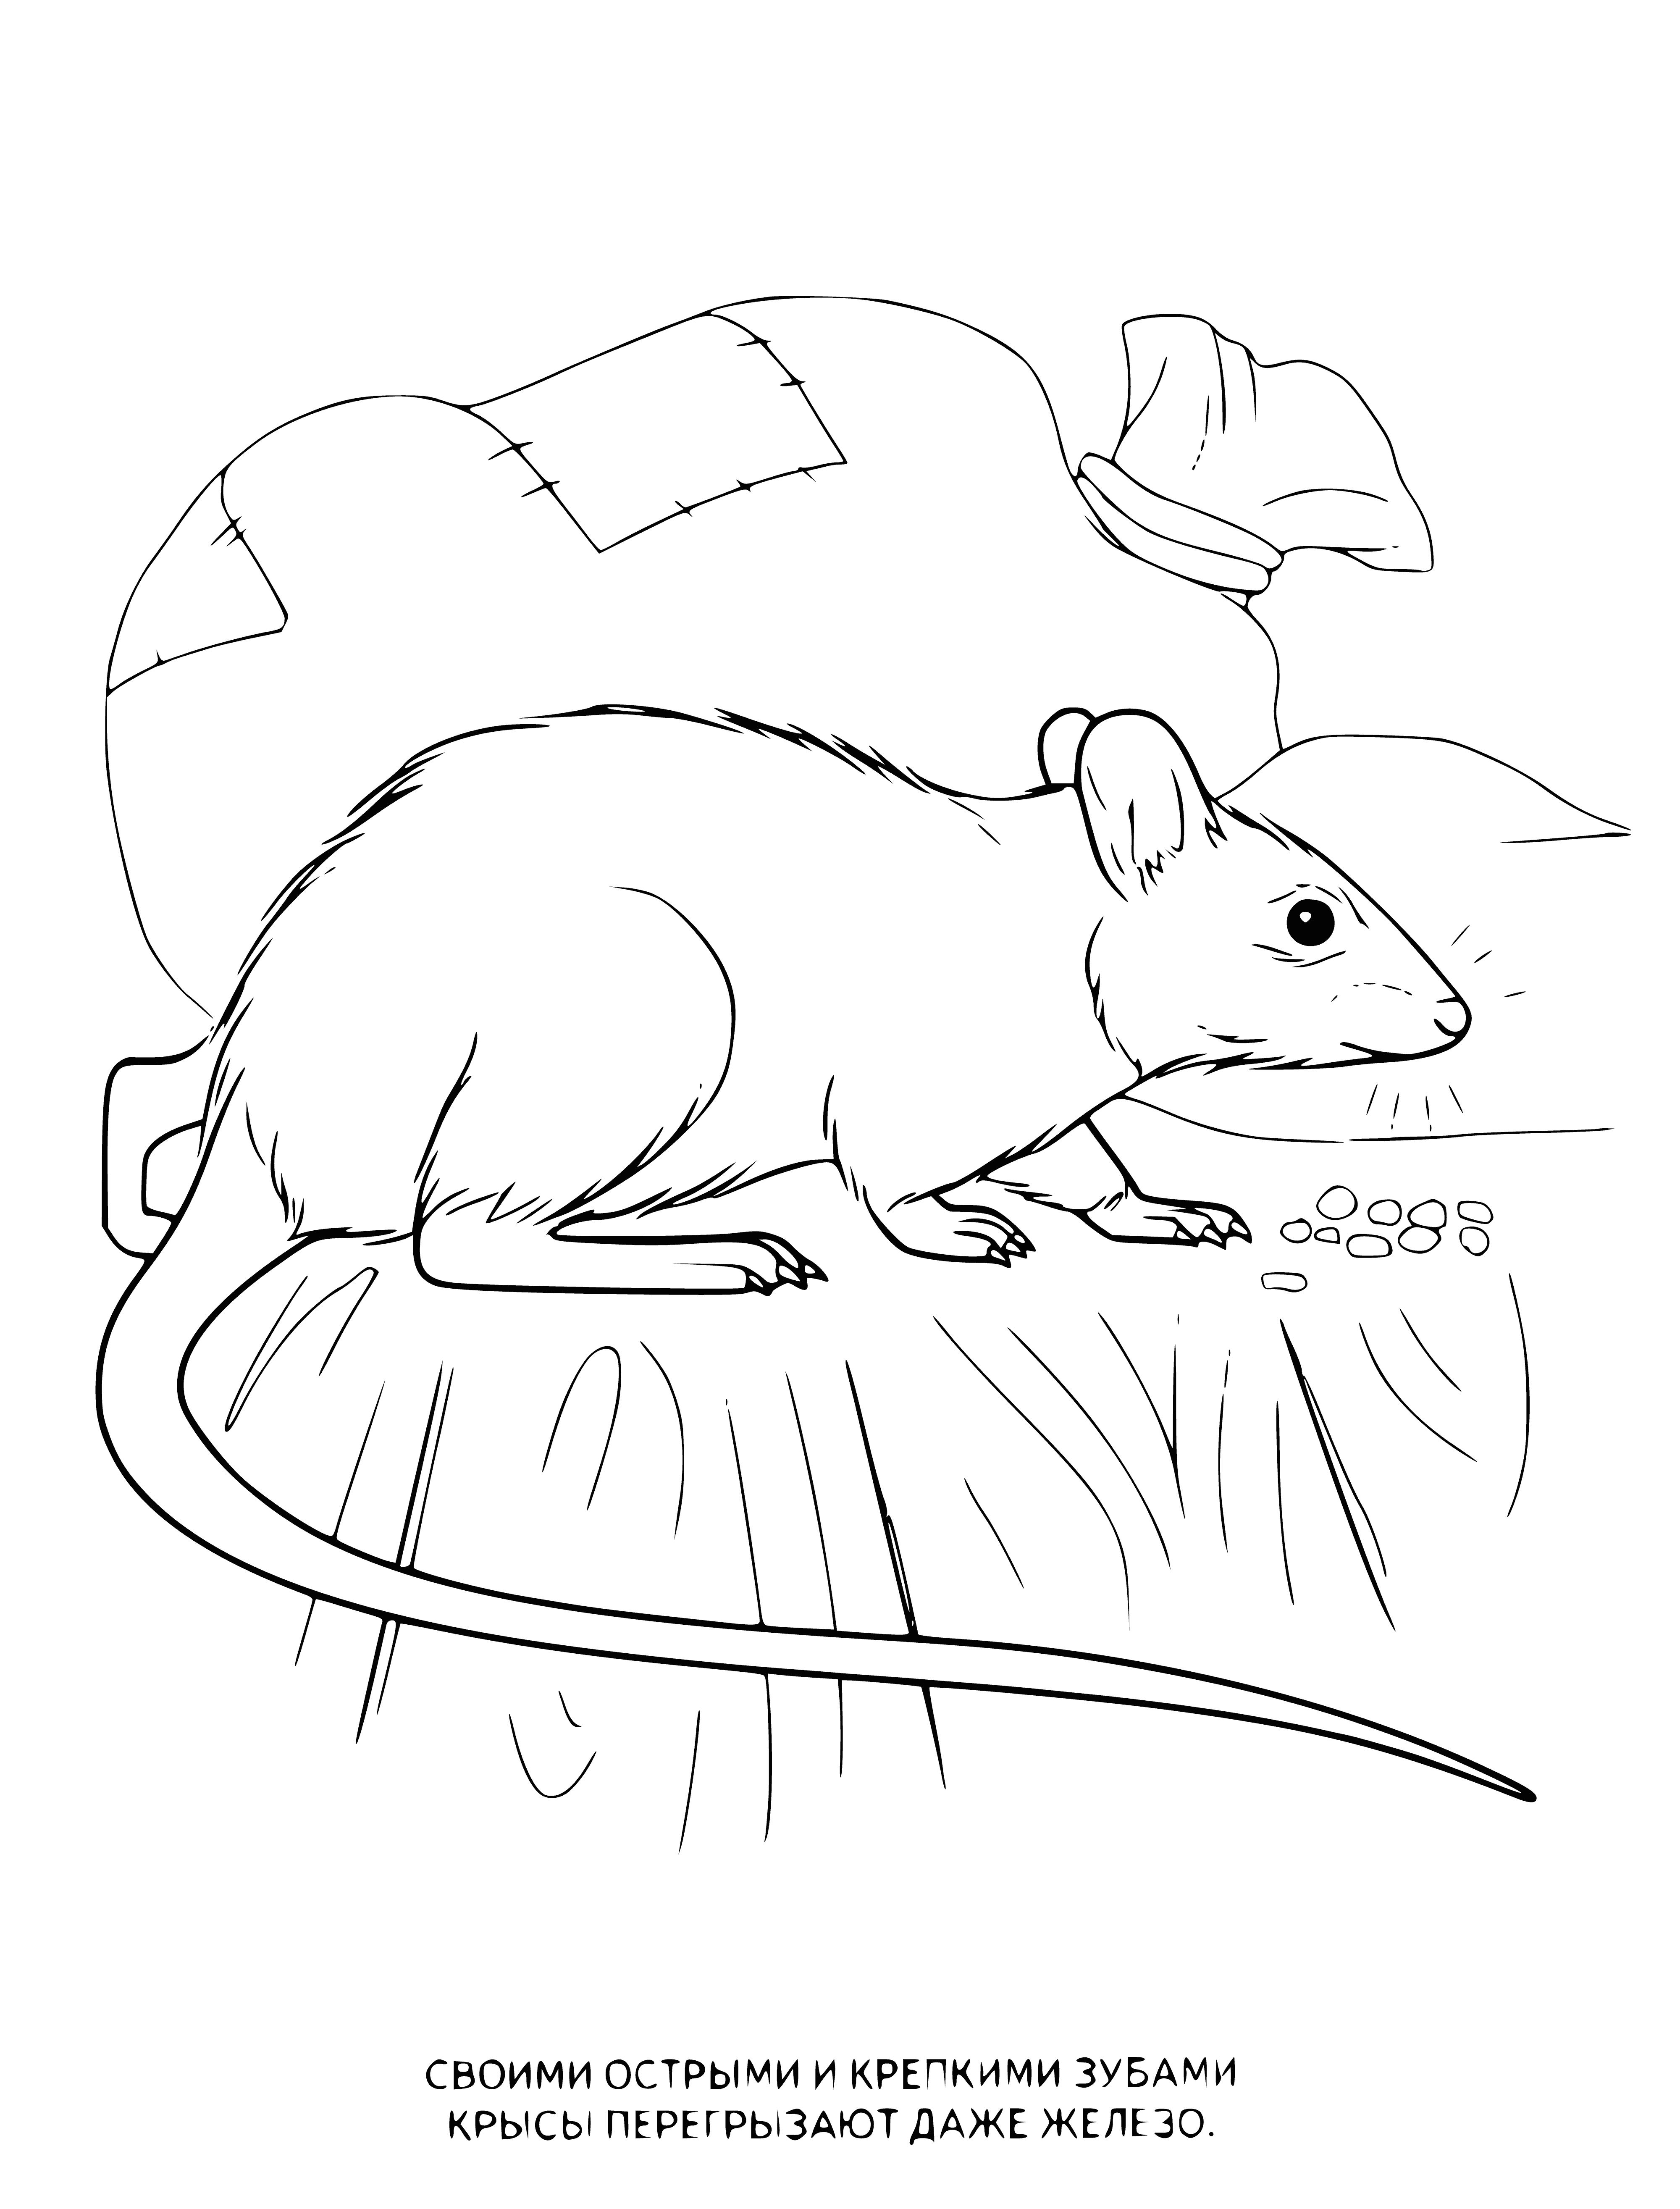 coloring page: Rat with long tail stands on hind legs, looking at viewer in this brown coloring page. #colorfun